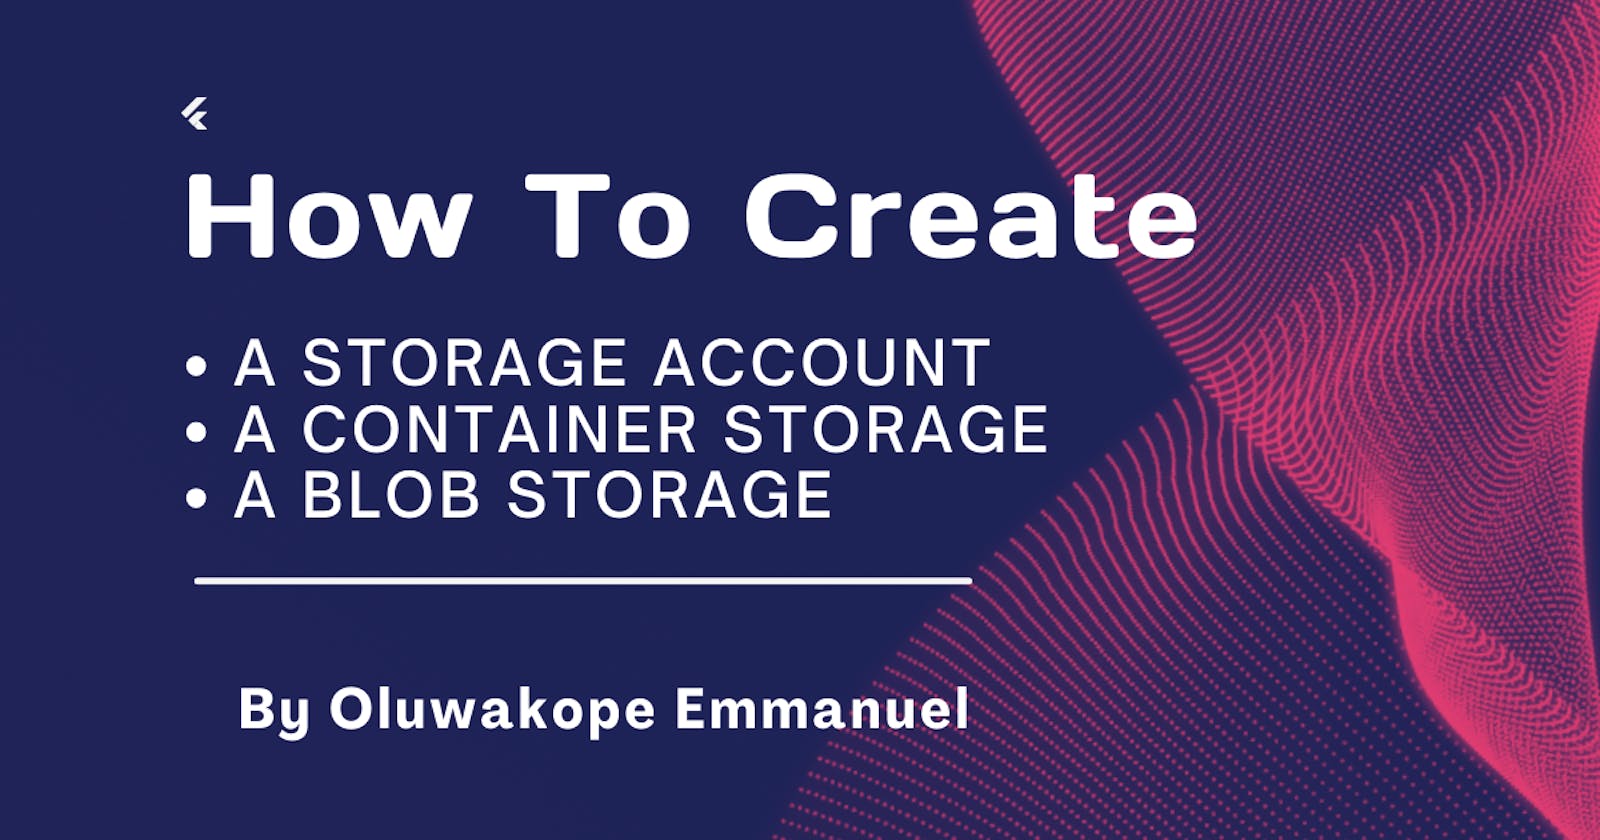 How To Create : A Storage Account, A Container Storage And A Blob Storage